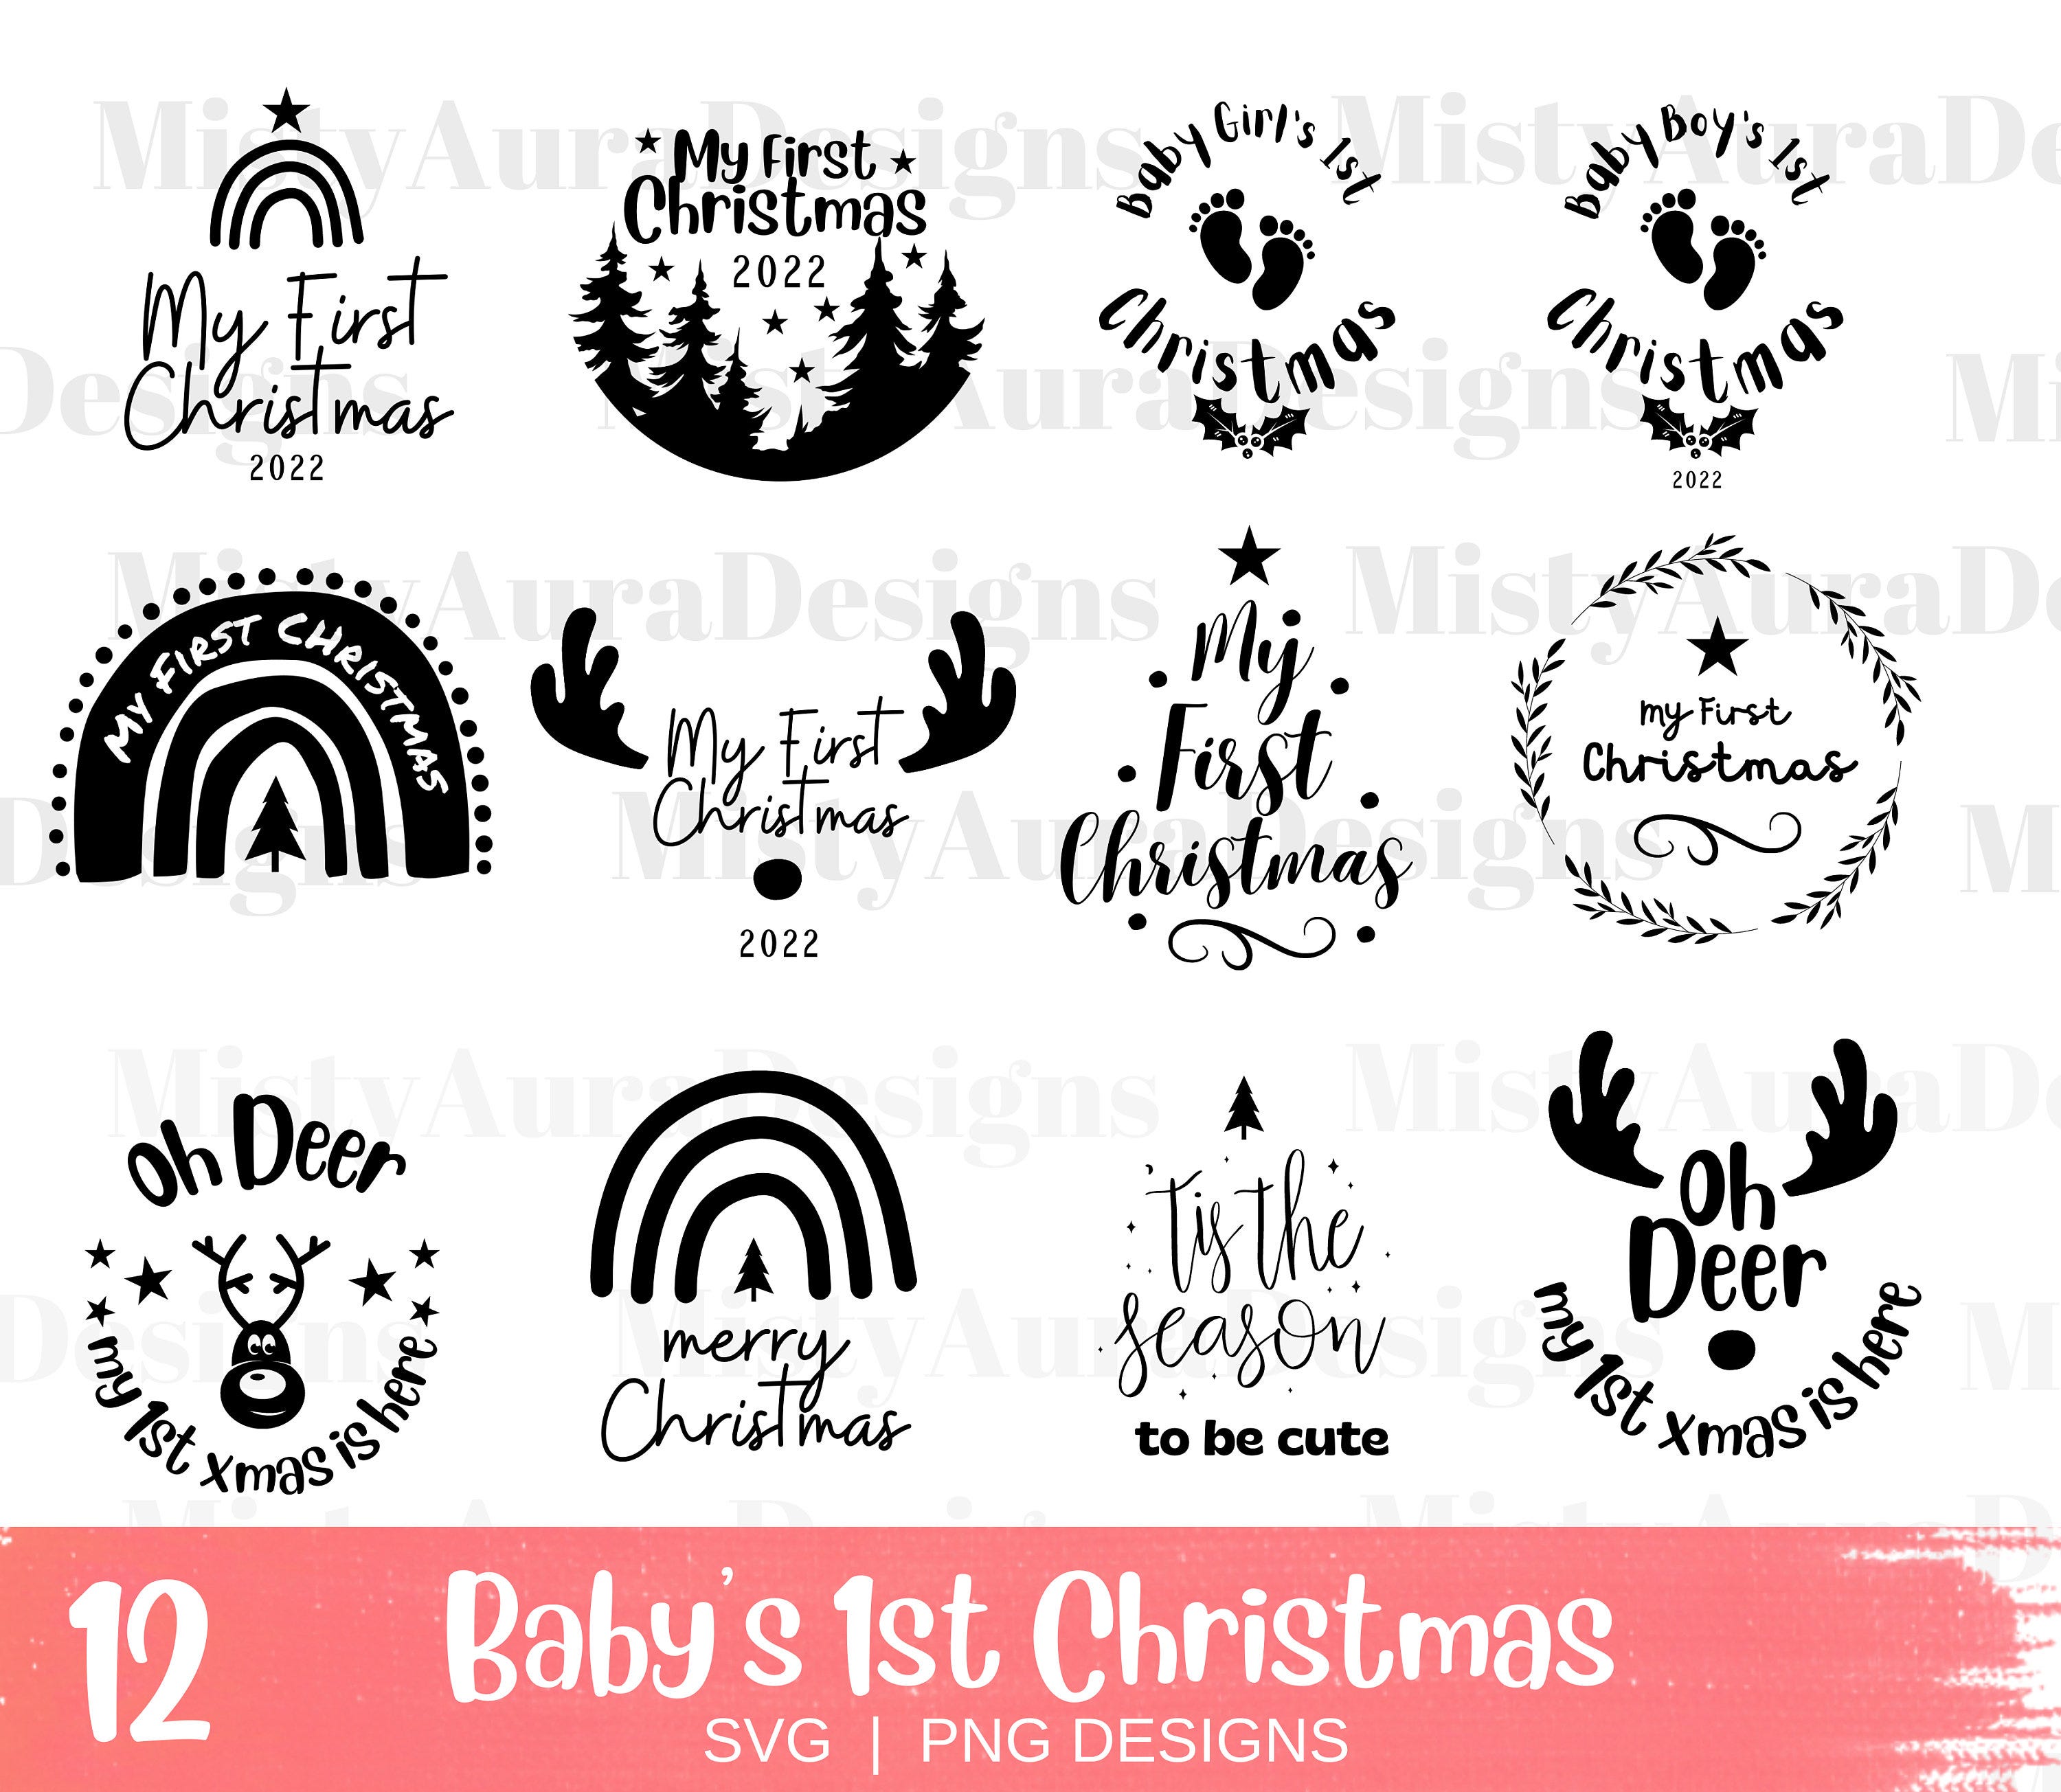 Baby’s first Christmas Baby svg bundle | My first Christmas svg | First Christmas svg | baby’s first Christmas svg | ornament svg | Xmas PNG